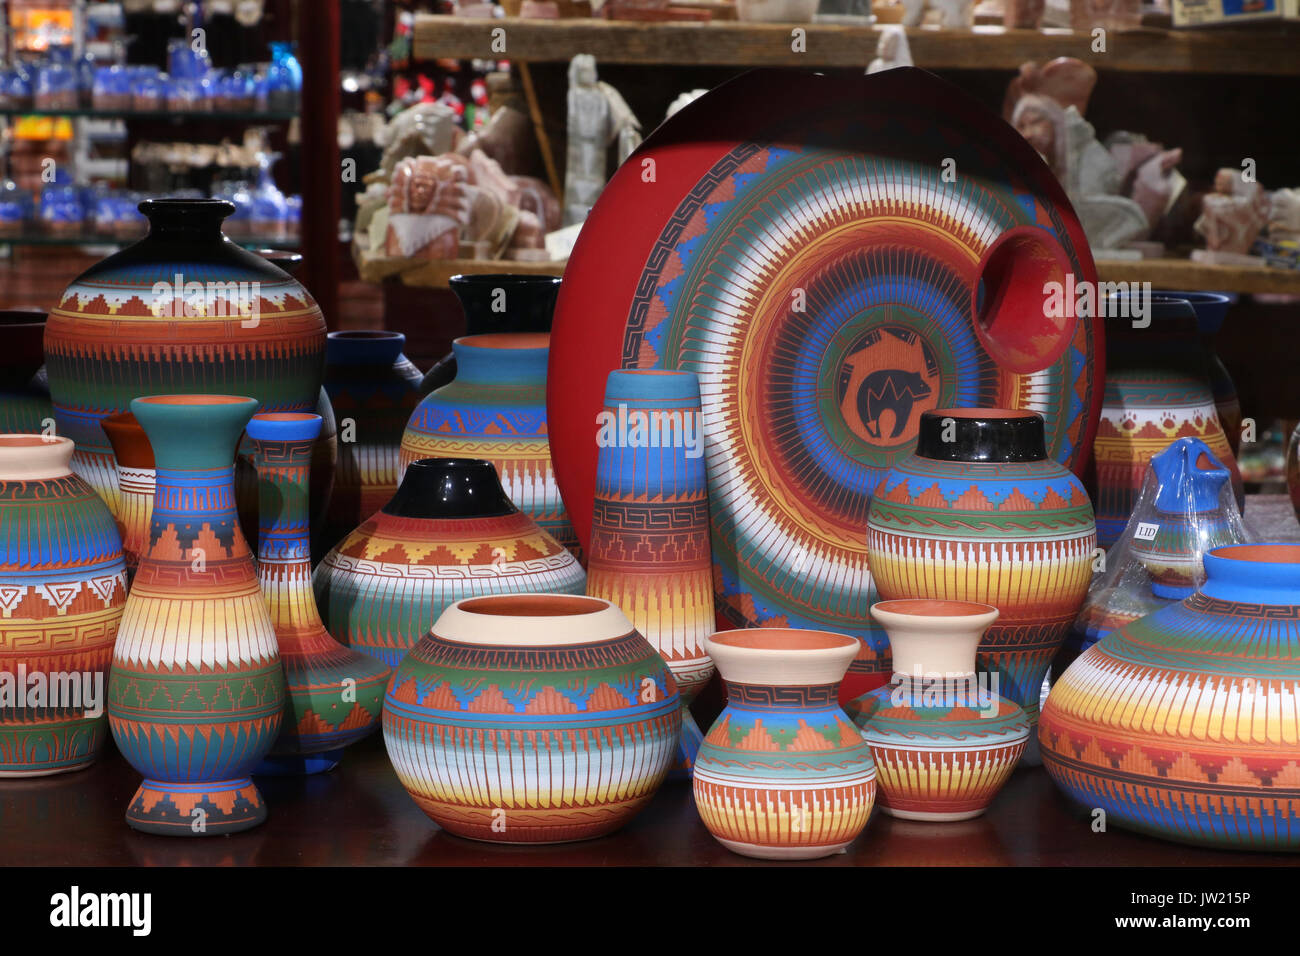 Shelves with hand made by native american souvenirs at historic trading post. Native american craft and culture background. Navajo etched pottery. Gra Stock Photo